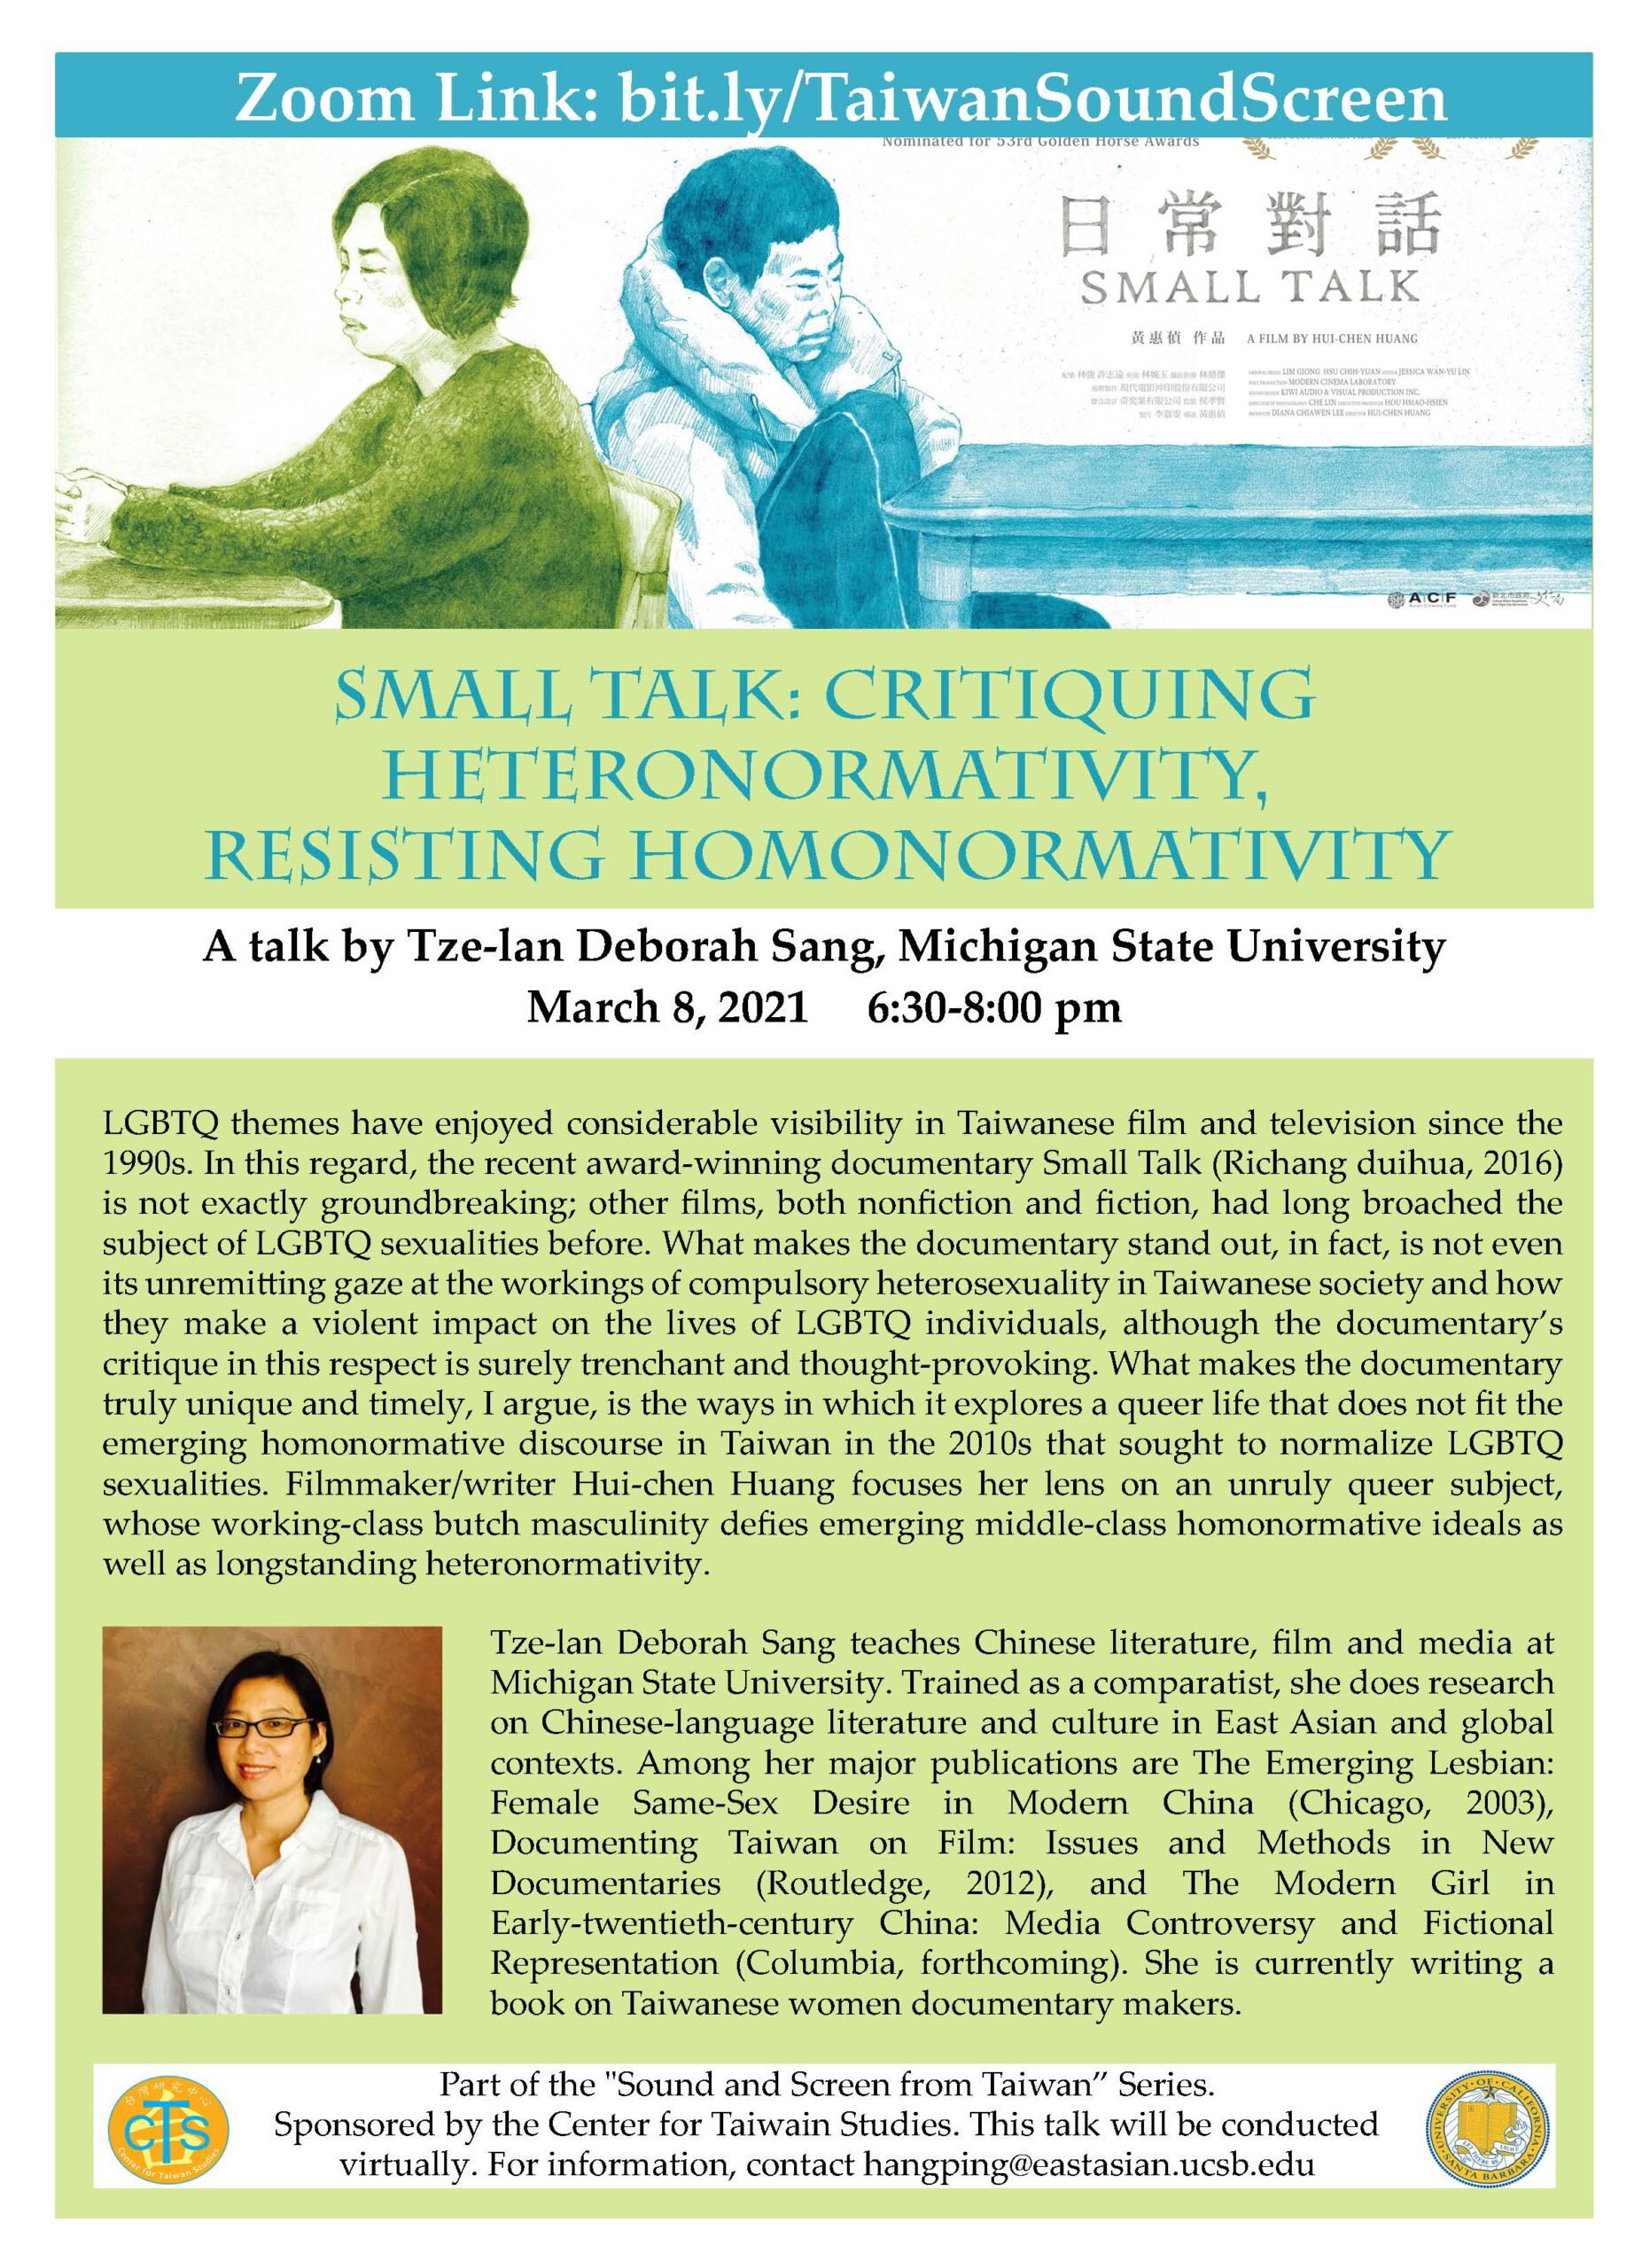 Flyer for "Small Talk: Critiquing Heteronormativity, Resisting Heteronormativity" by Tze-Ian Deborah Sang on 3/8/21 at 6:30-8:00PM